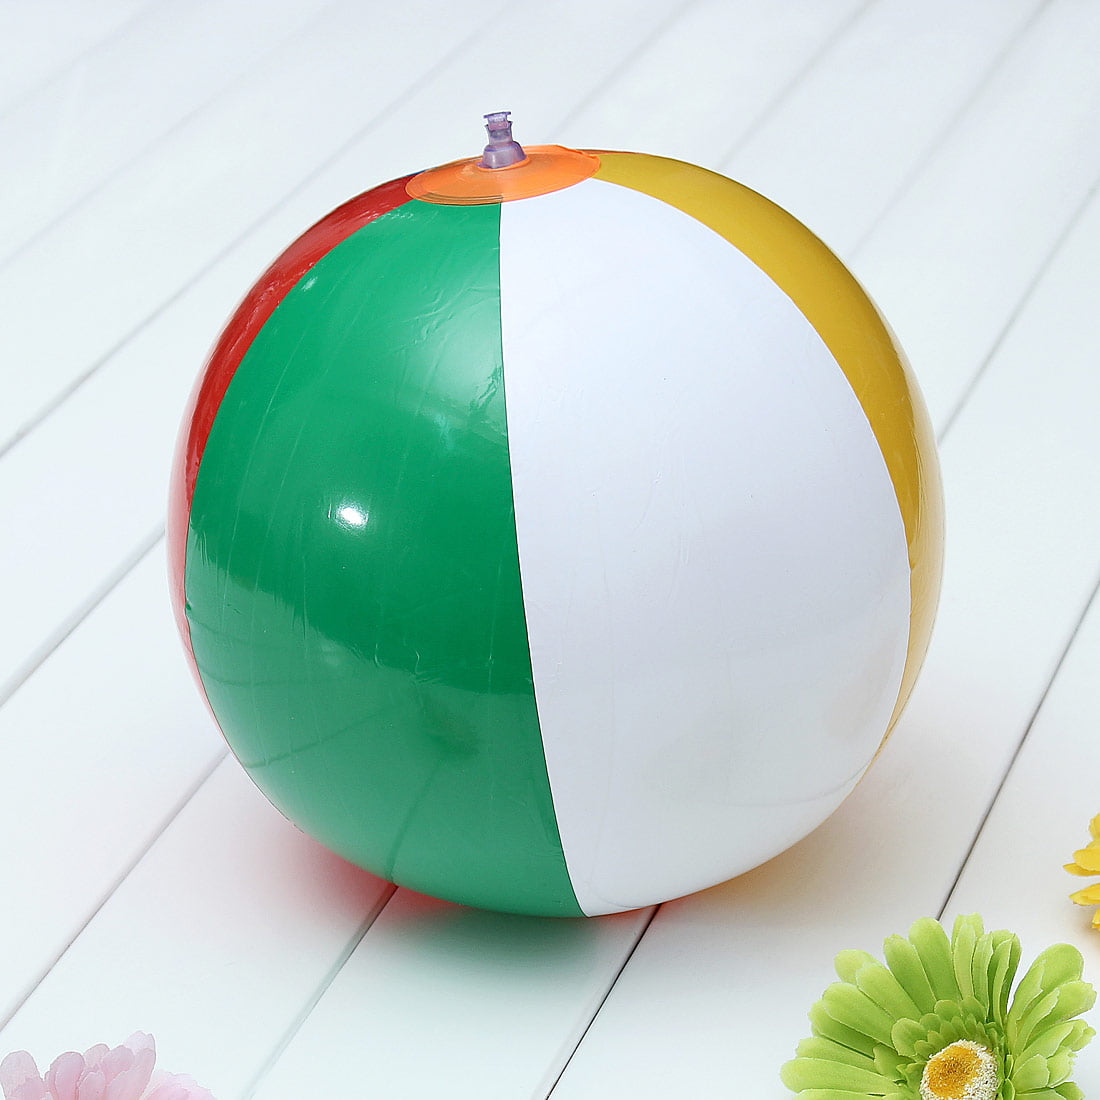 Details about   PVC Inflatable Blowup Panel Beach Ball Holiday Party Swimming Pool Toy C0C0 